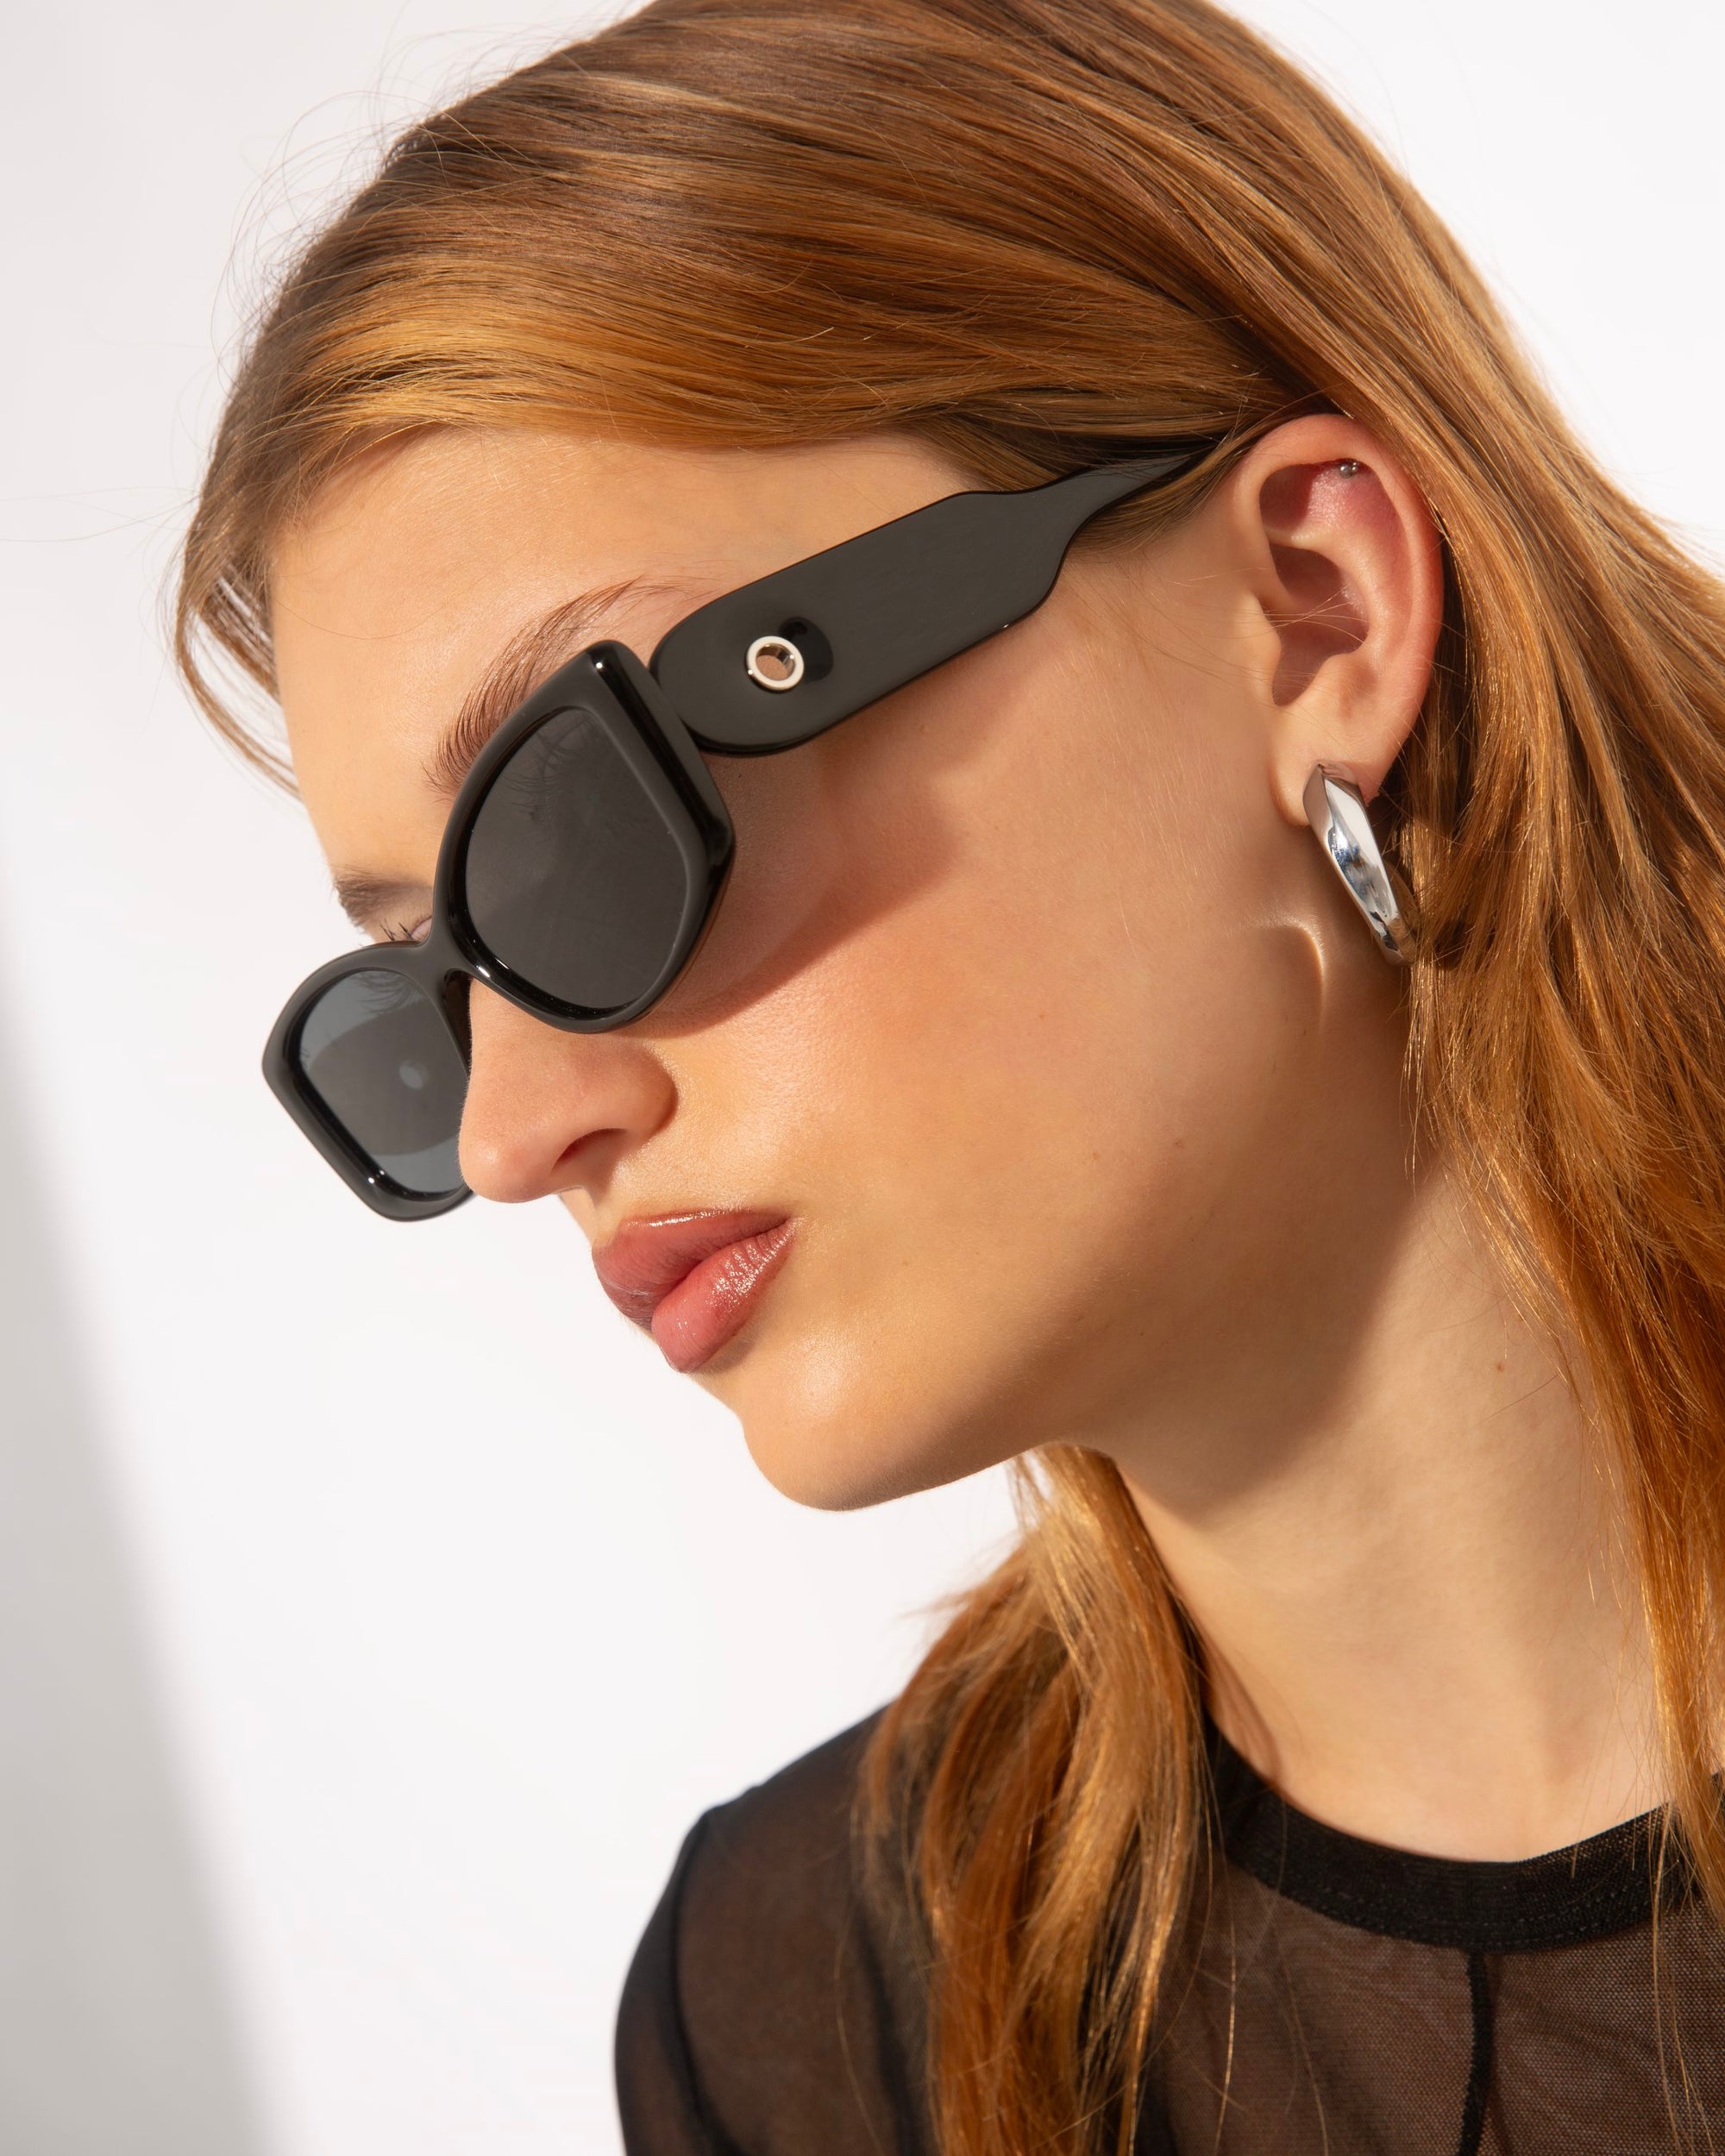 A person with light brown hair is wearing black For Art's Sake® Mene sunglasses and silver hoop earrings. They are dressed in a black top and are looking to the side, showcasing their chic Cat-Eye silhouette. The background is plain white.